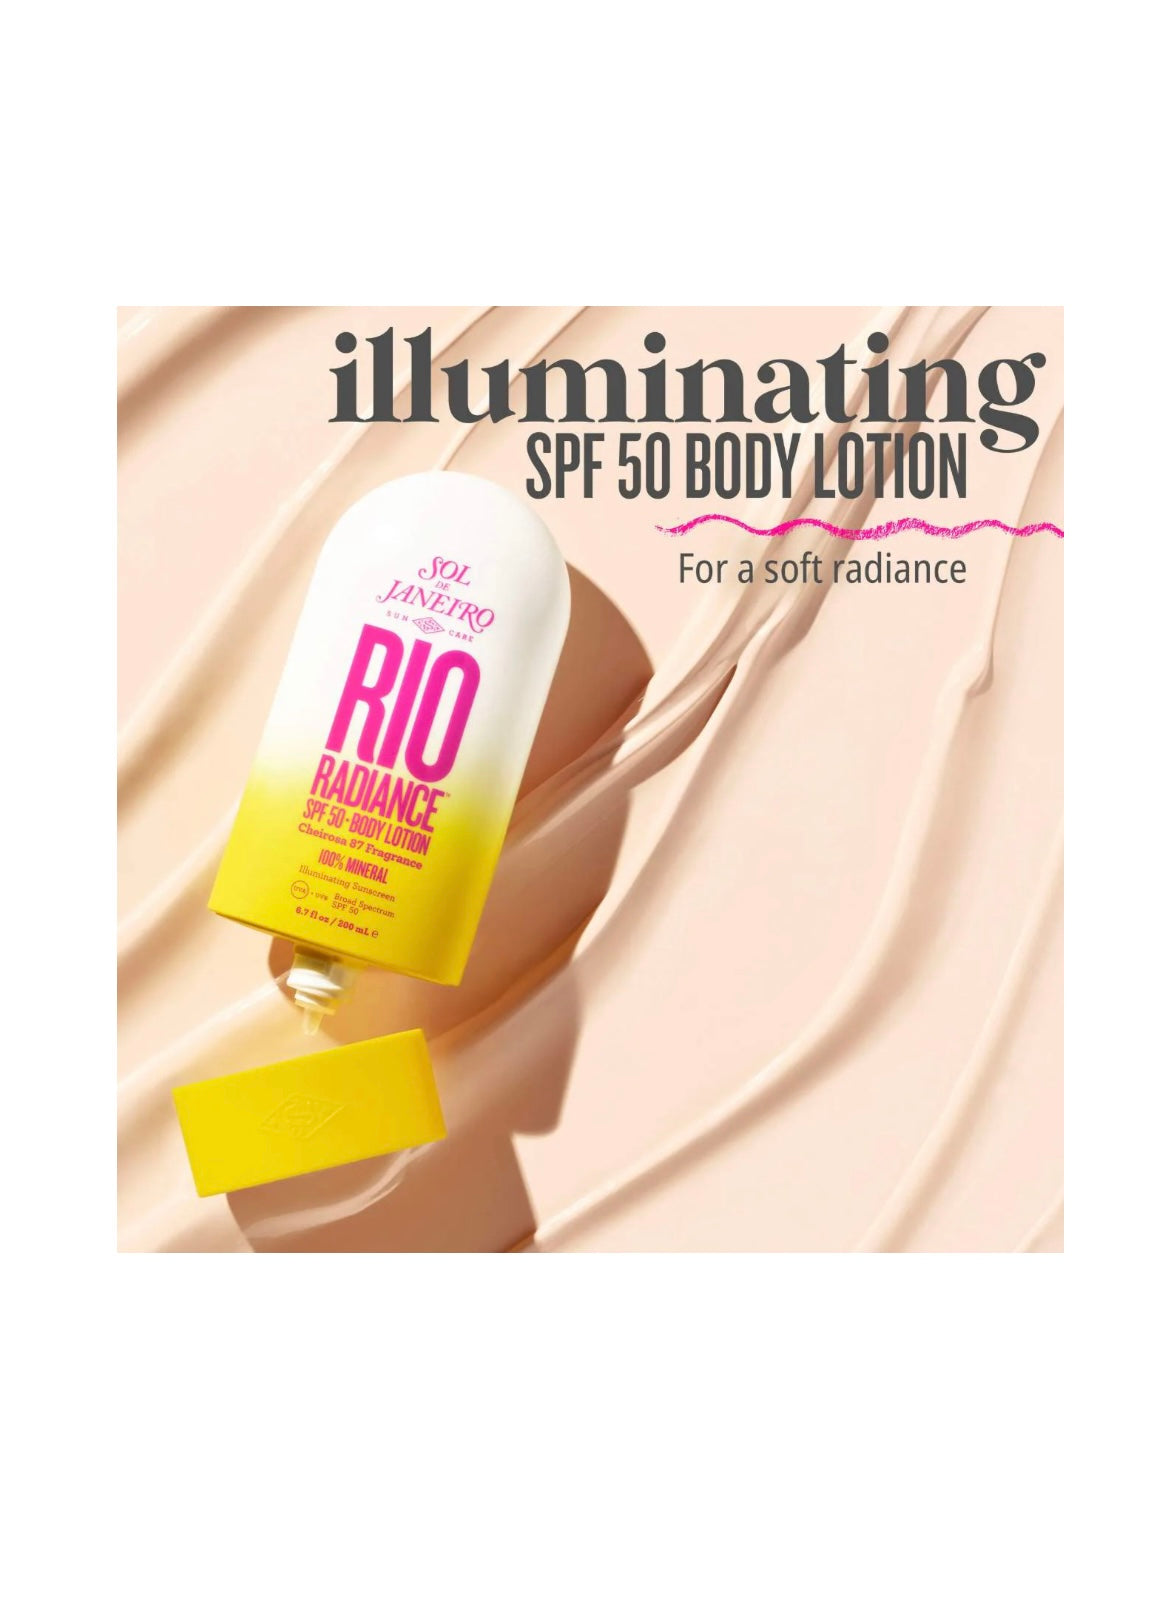 Sol de Janeiro
Rio Radiance™ SPF 50 Mineral Body Lotion Sunscreen with Niacinamide